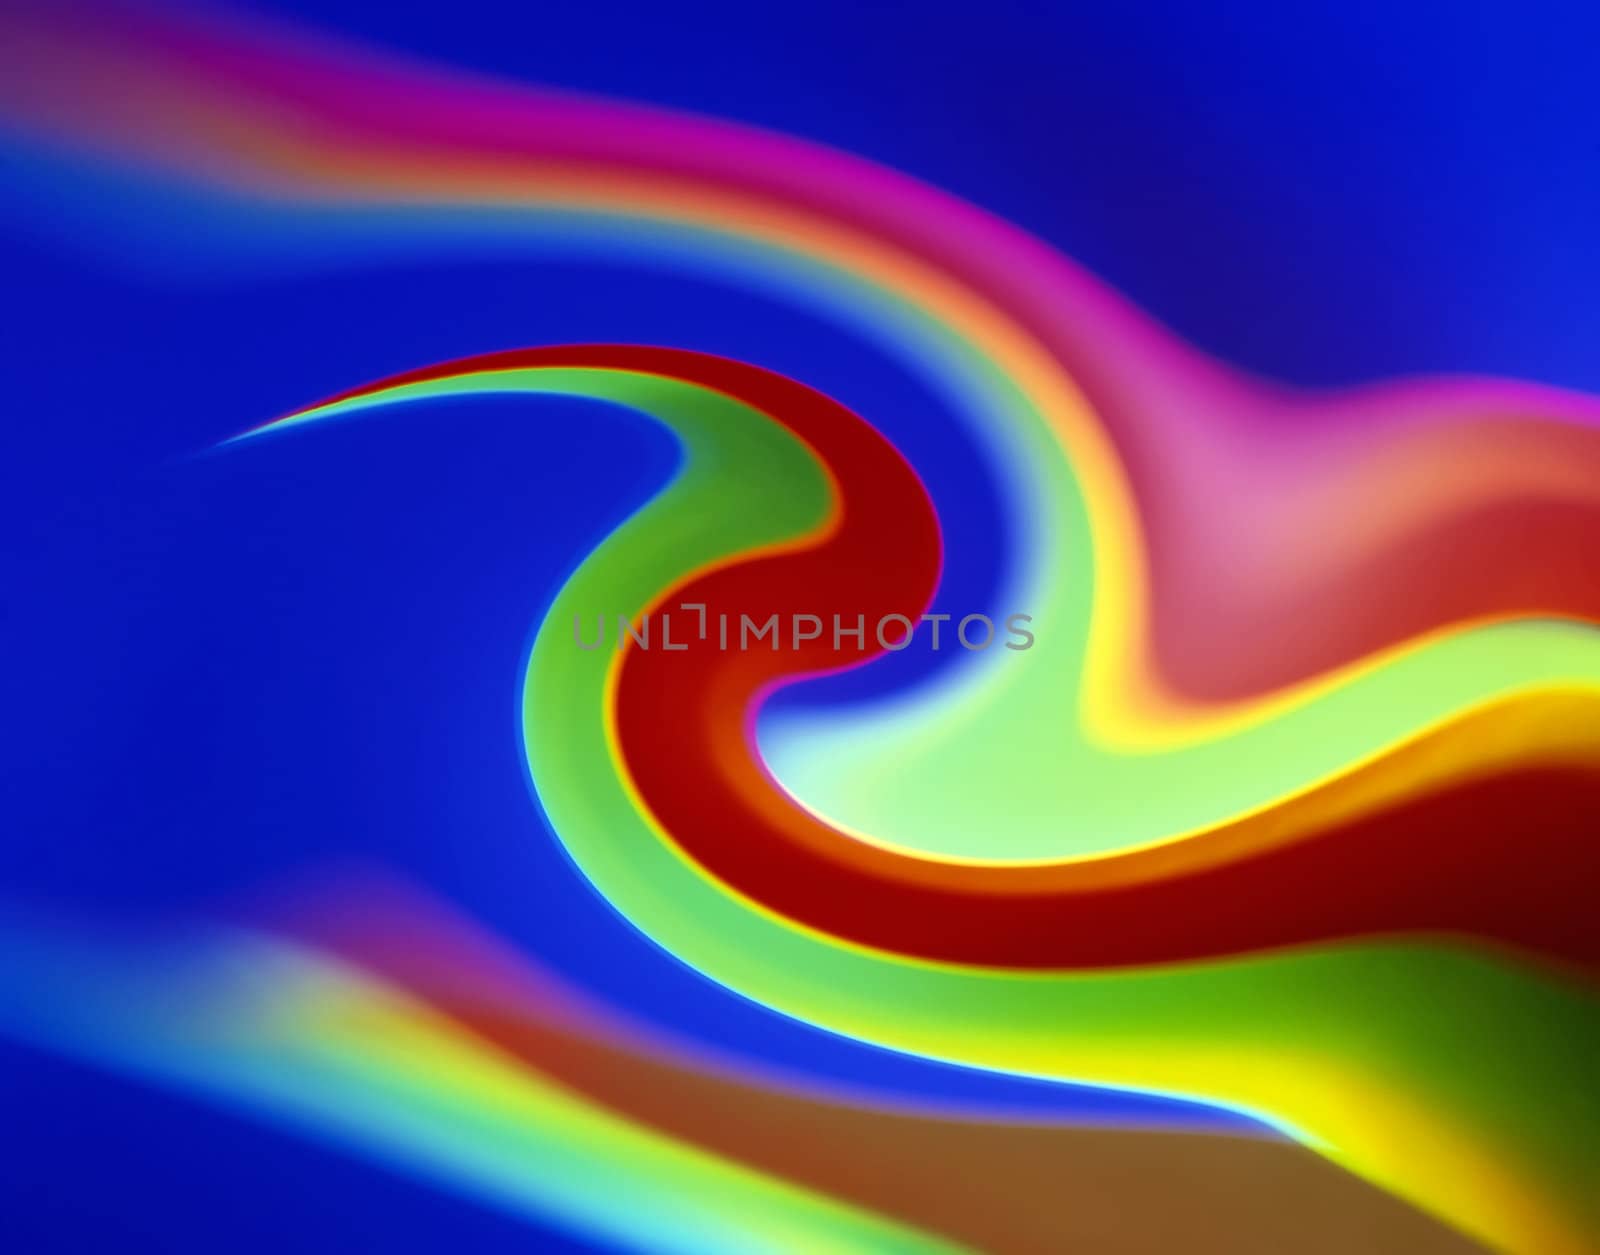 Colorful abstract background with curves and waves